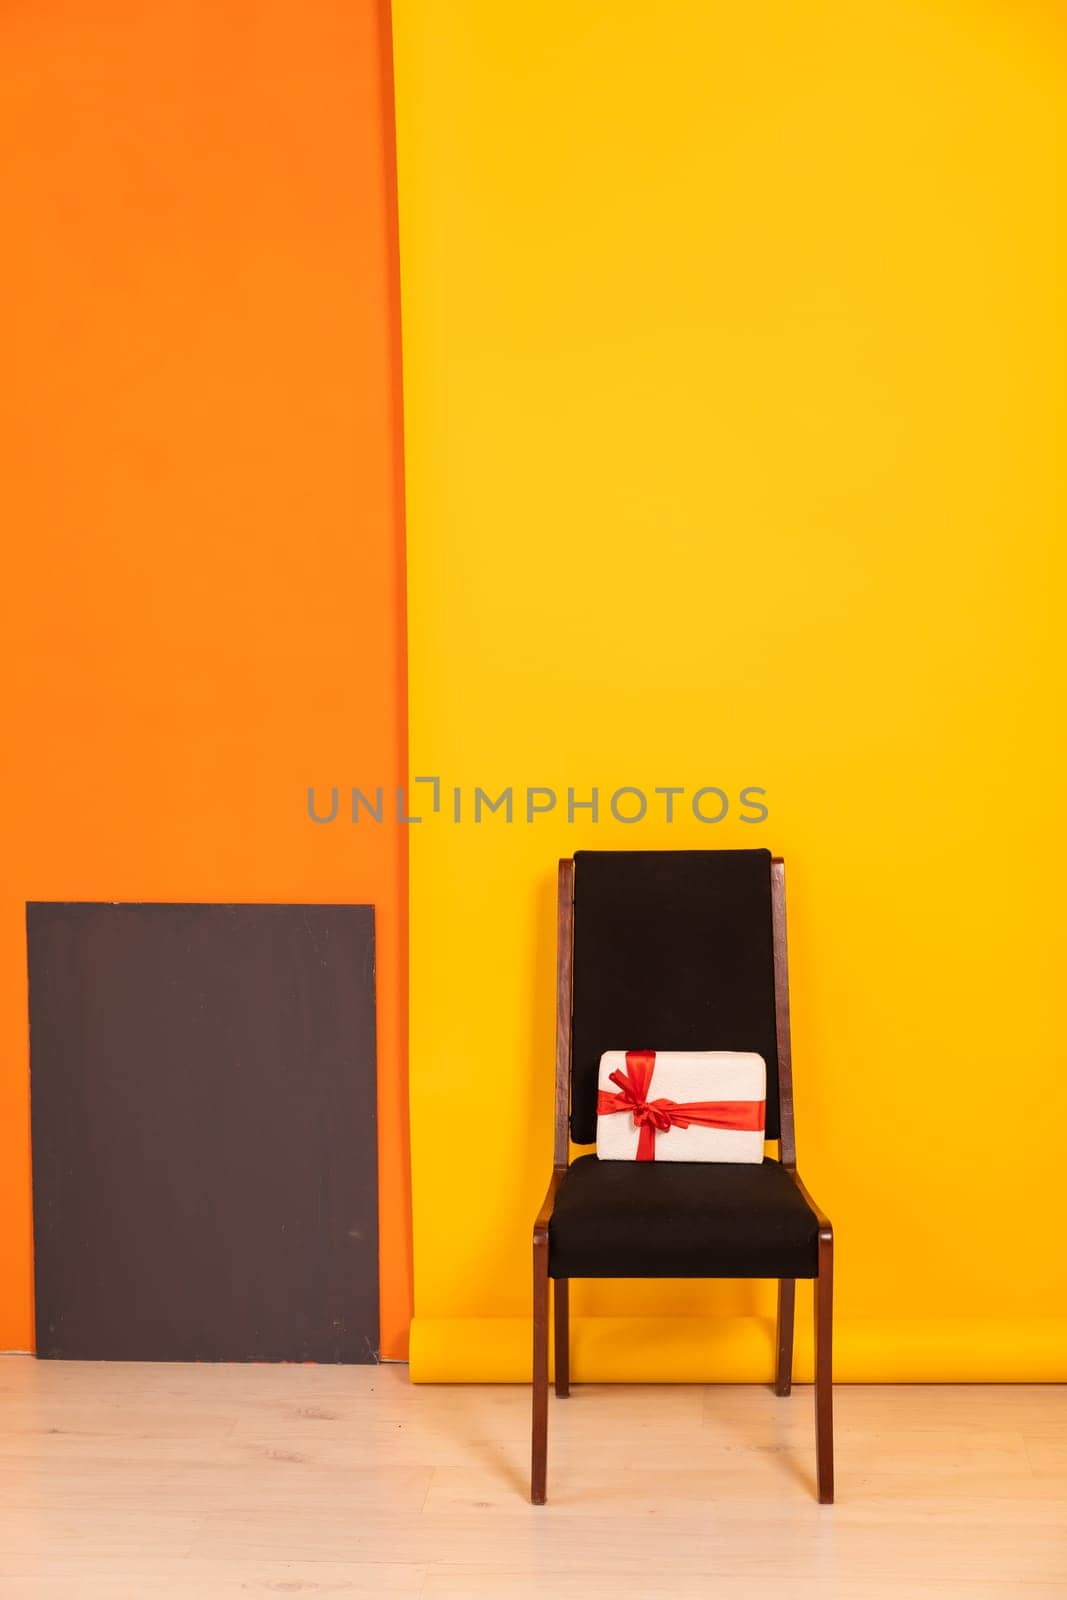 Vintage chair with gift in interior on yellow background by Simakov